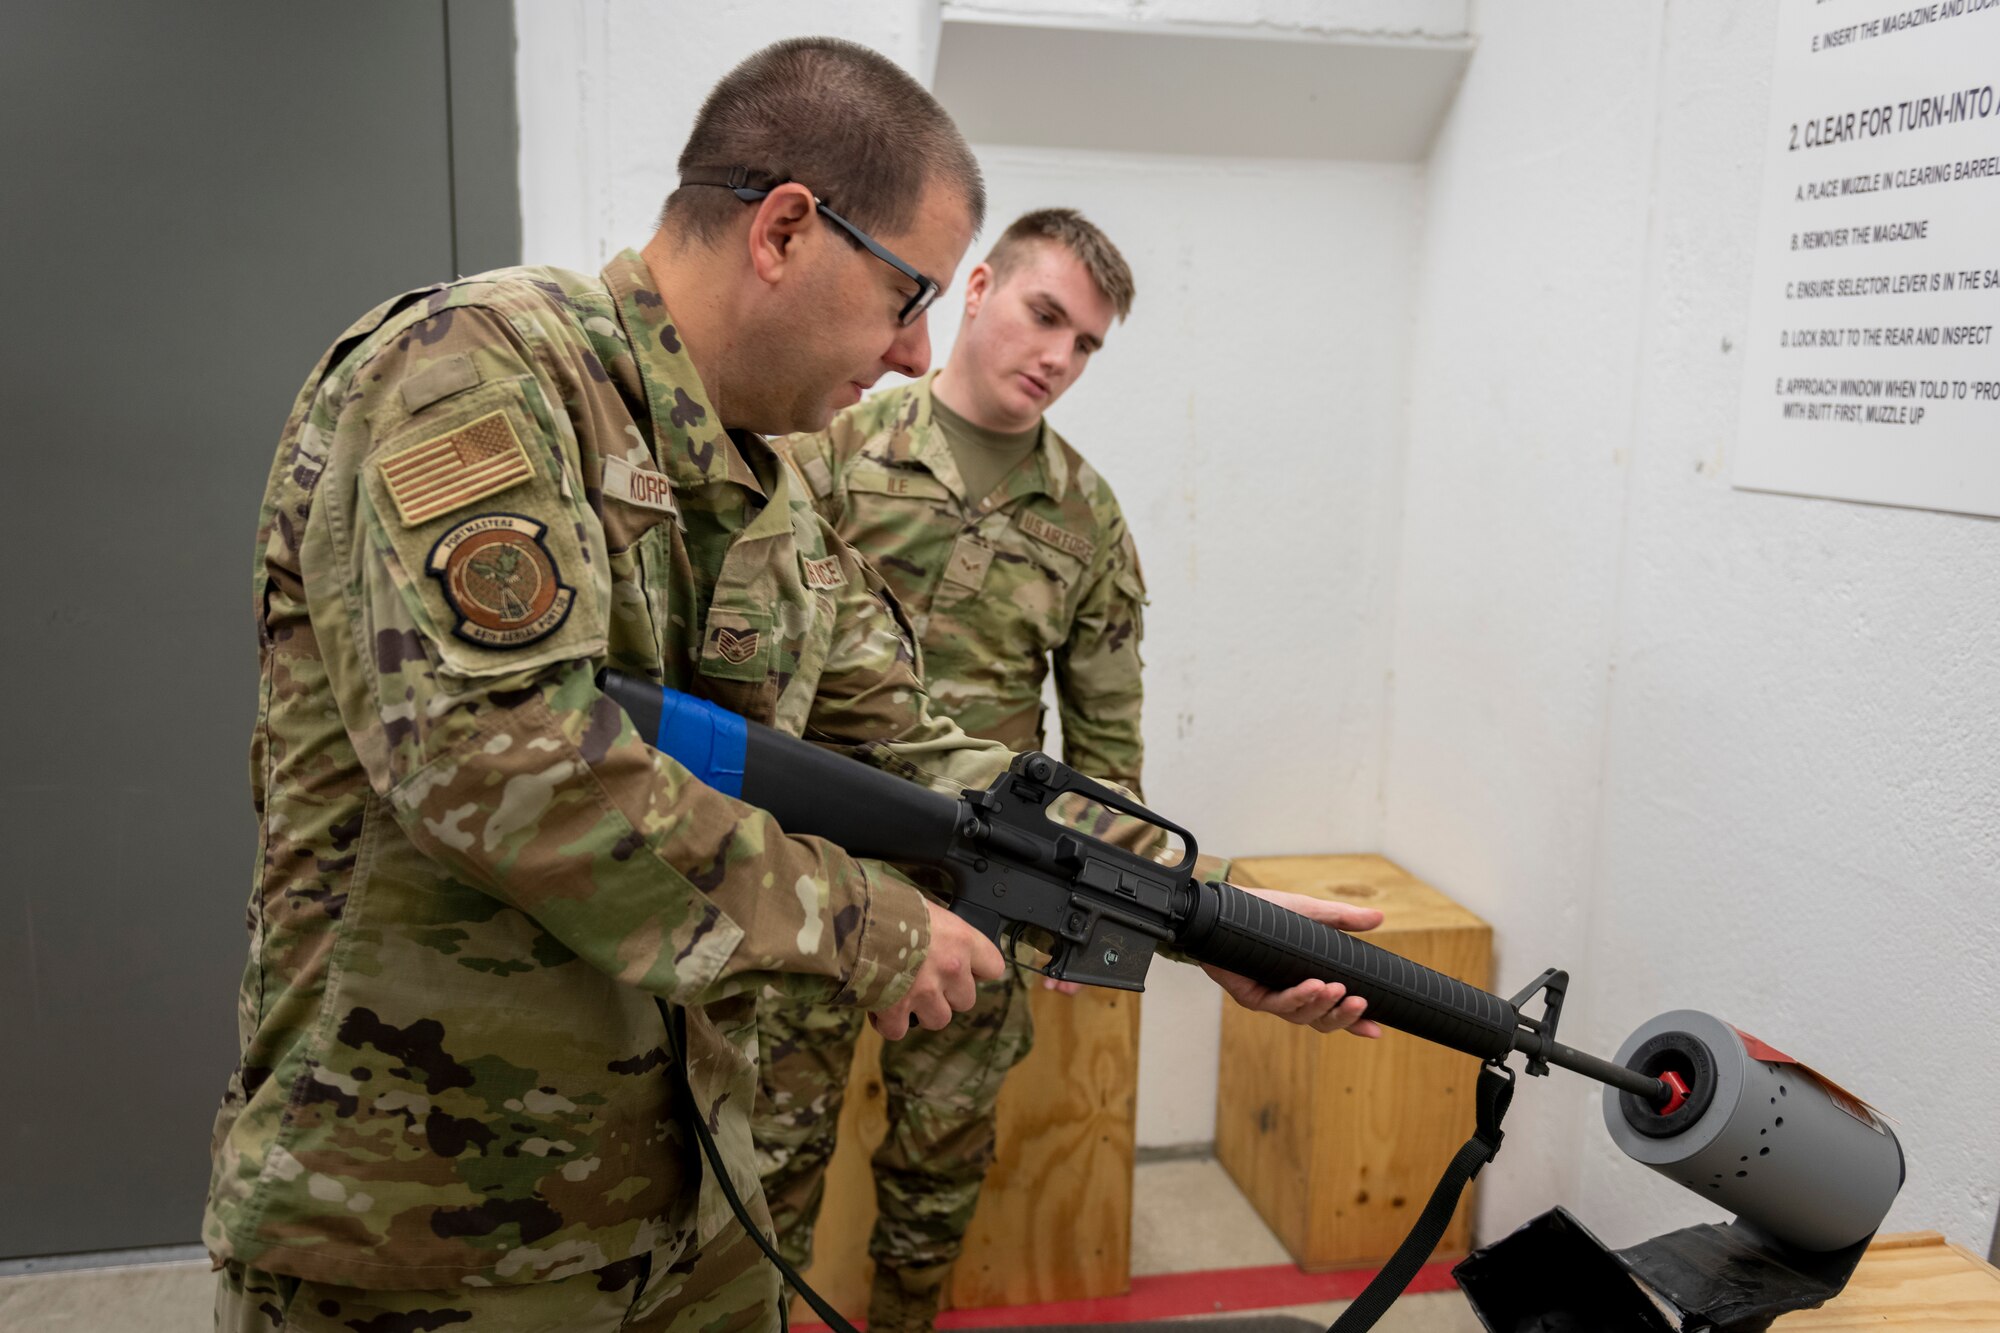 U.S. Air Force Airman 1st Class Cody Ile, 436th Logistics Readiness Squadron, Dover Air Force Base, Del., watches Staff Sgt. Jeffrey Korpics, 46th Aerial Port Squadron, clear an issued M16 rifle Aug. 14, 2022.  Reserve aerial porters from the 512th Airlift Wing, participated in a week-long Joint Readiness Training Center exercise at Fort Polk, La. JRTC scenarios allow complete integration of Air Force and other military services as well as host-nation and civilian role players. The exercises replicate many of the unique situations and challenges a unit may face including host-national officials and citizens, insurgents and terrorists, news media coverage, and non-governmental organizations. (U.S. Air Force photo by Senior Airman Ruben Rios)